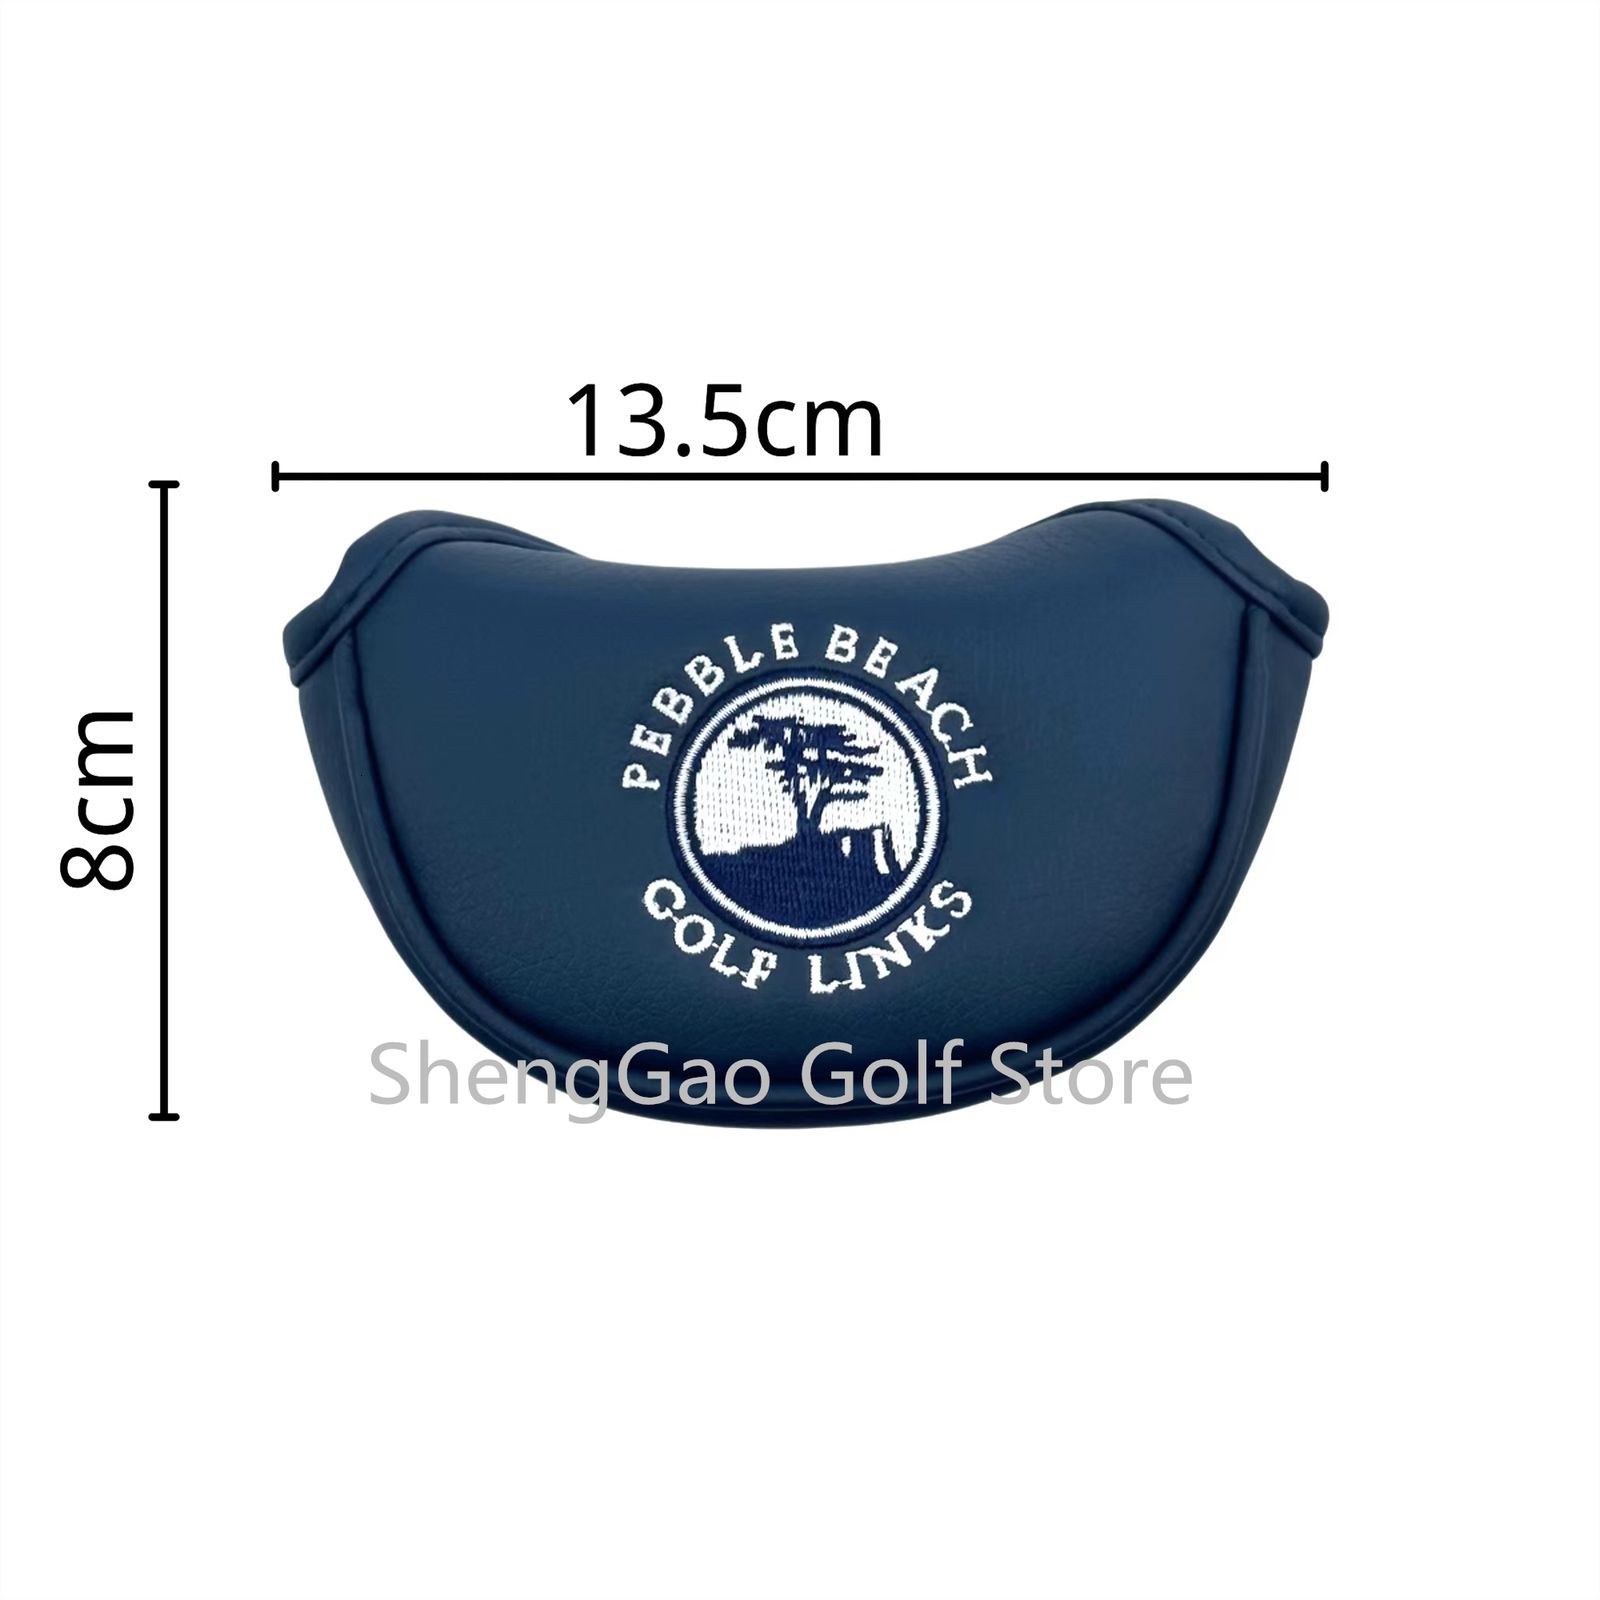 Putter Cover15